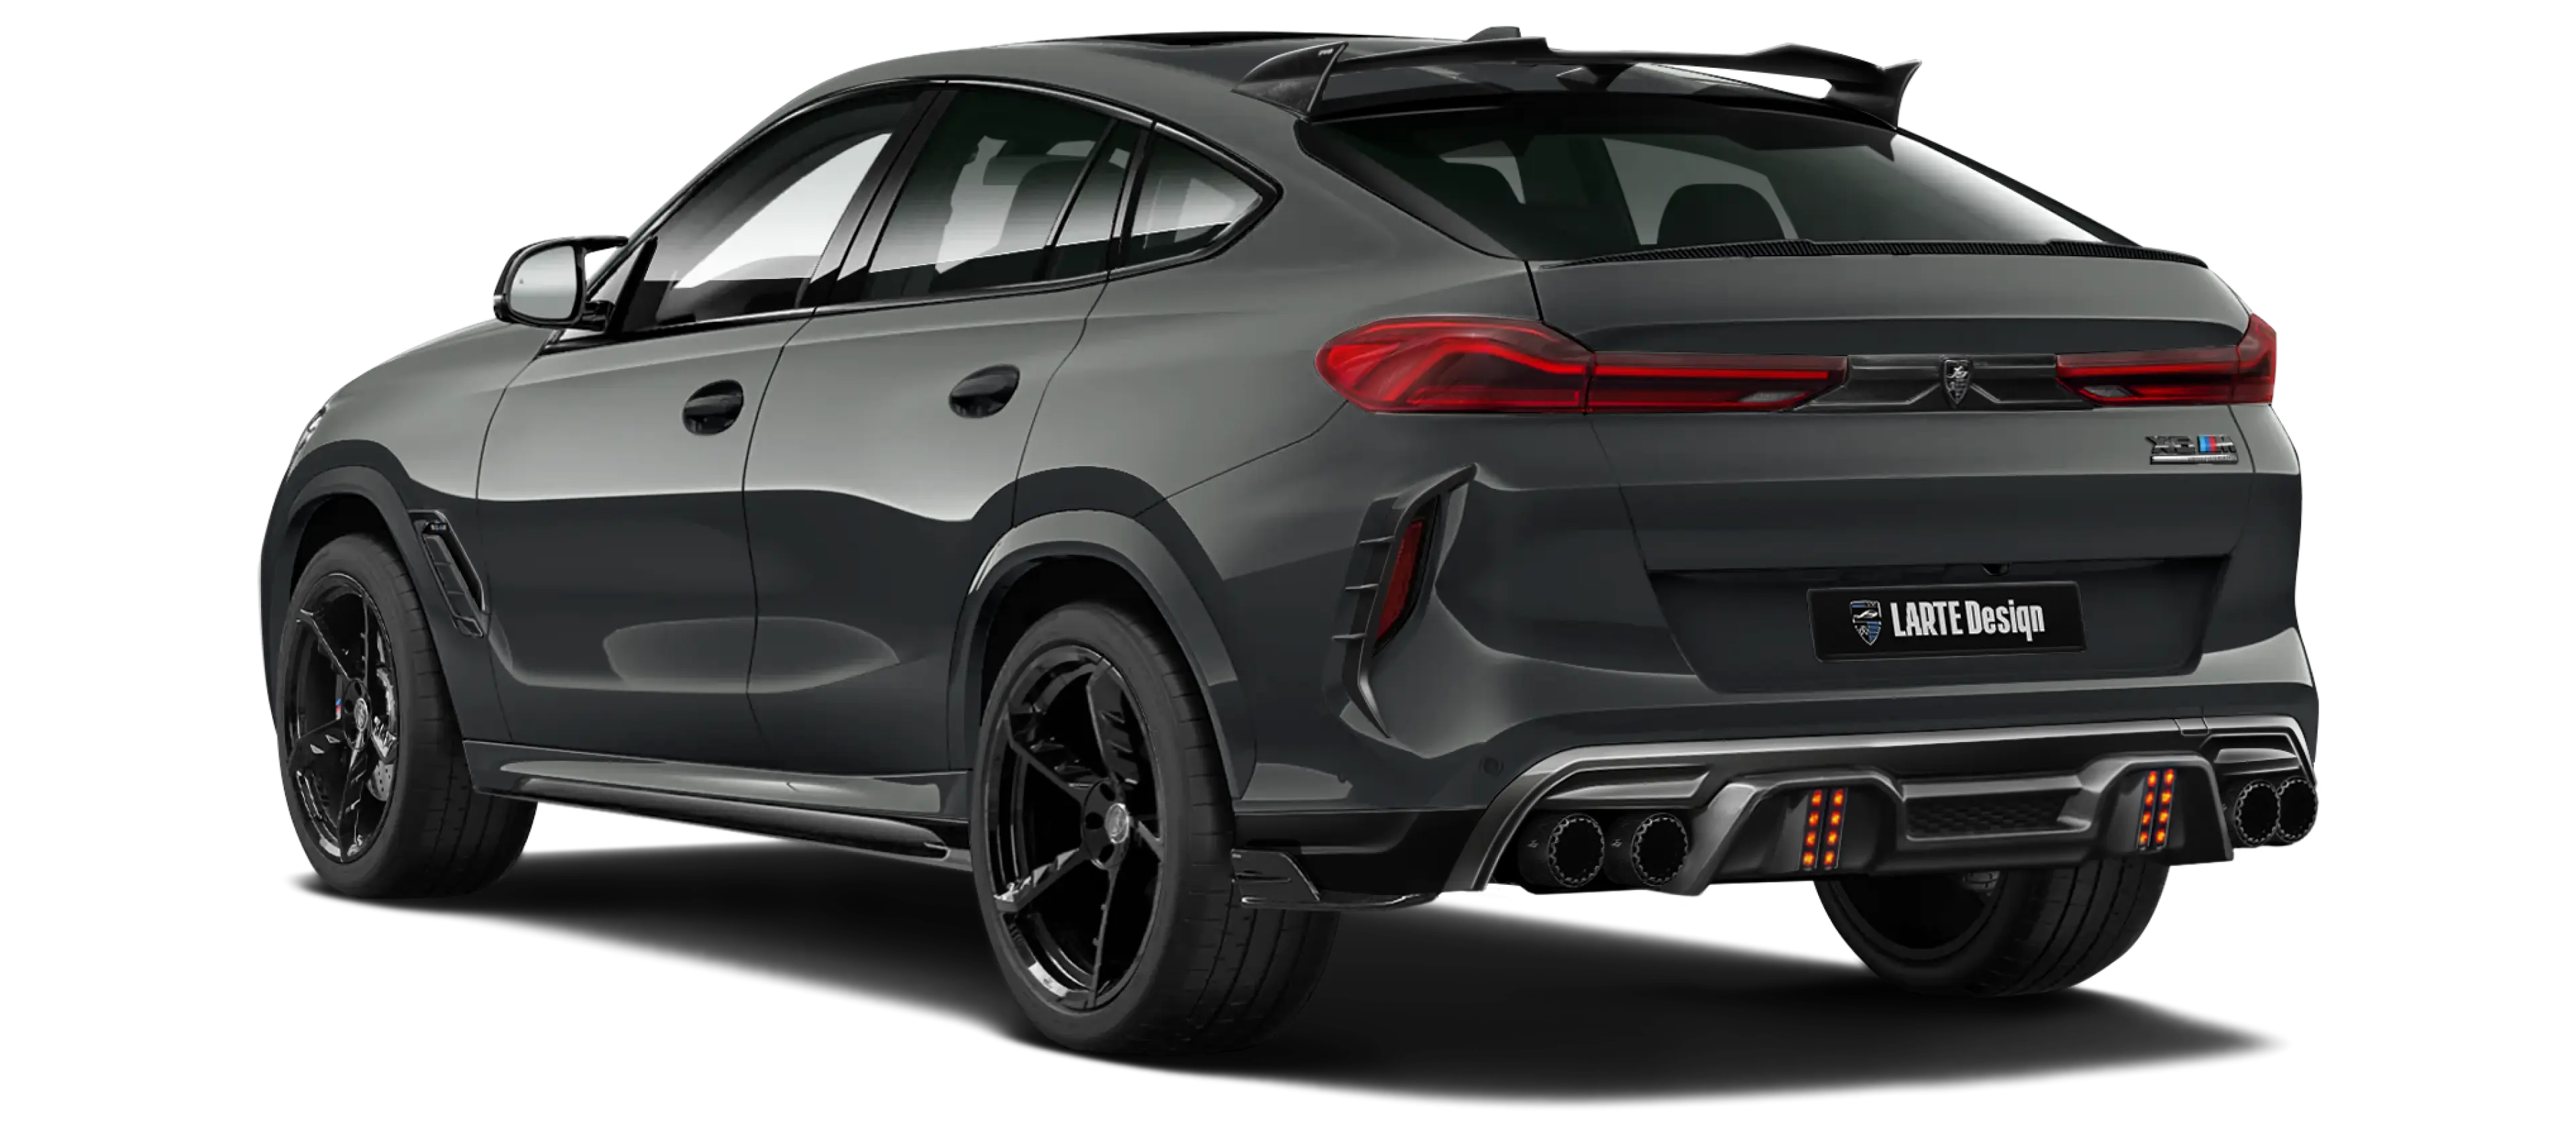 BMW X6M F96 LCI 2023 with painted body kit: rear view shown in Dravit grey